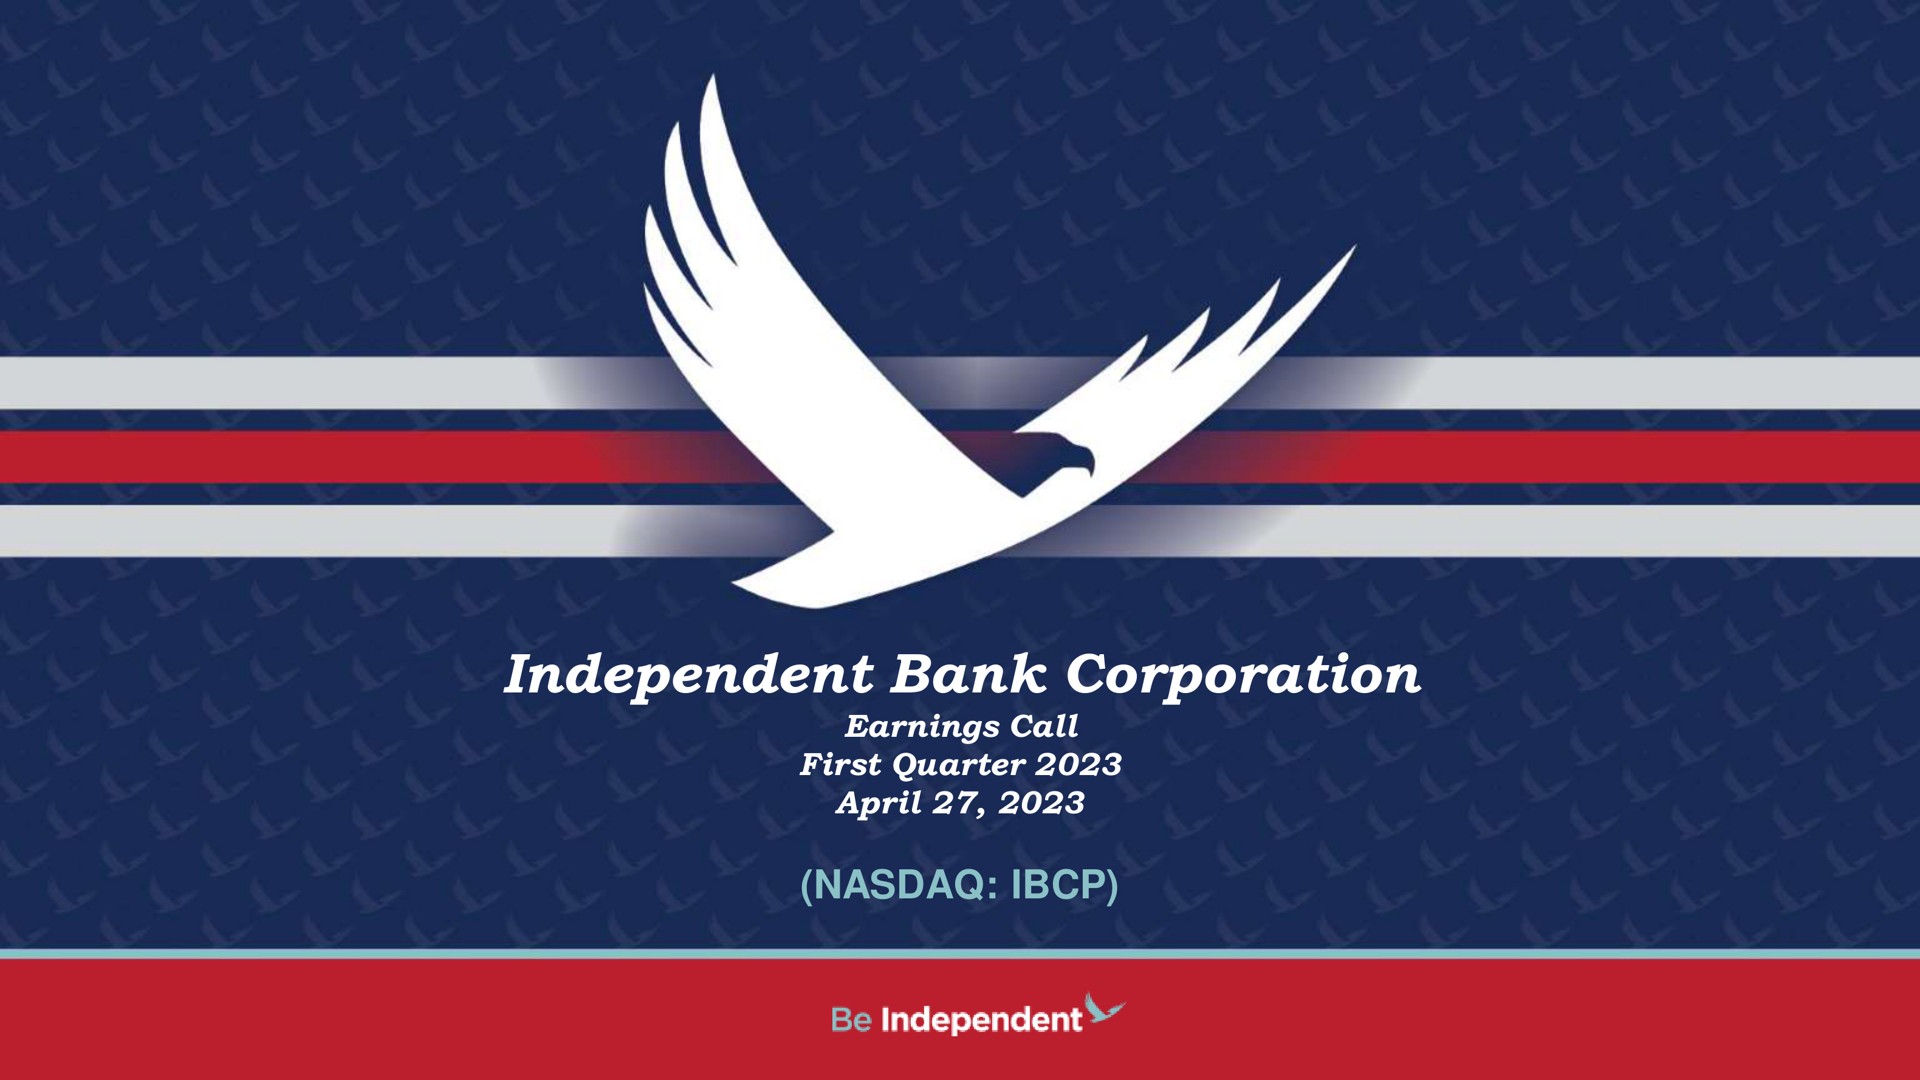 independent bank corporation | Independent Bank Corp